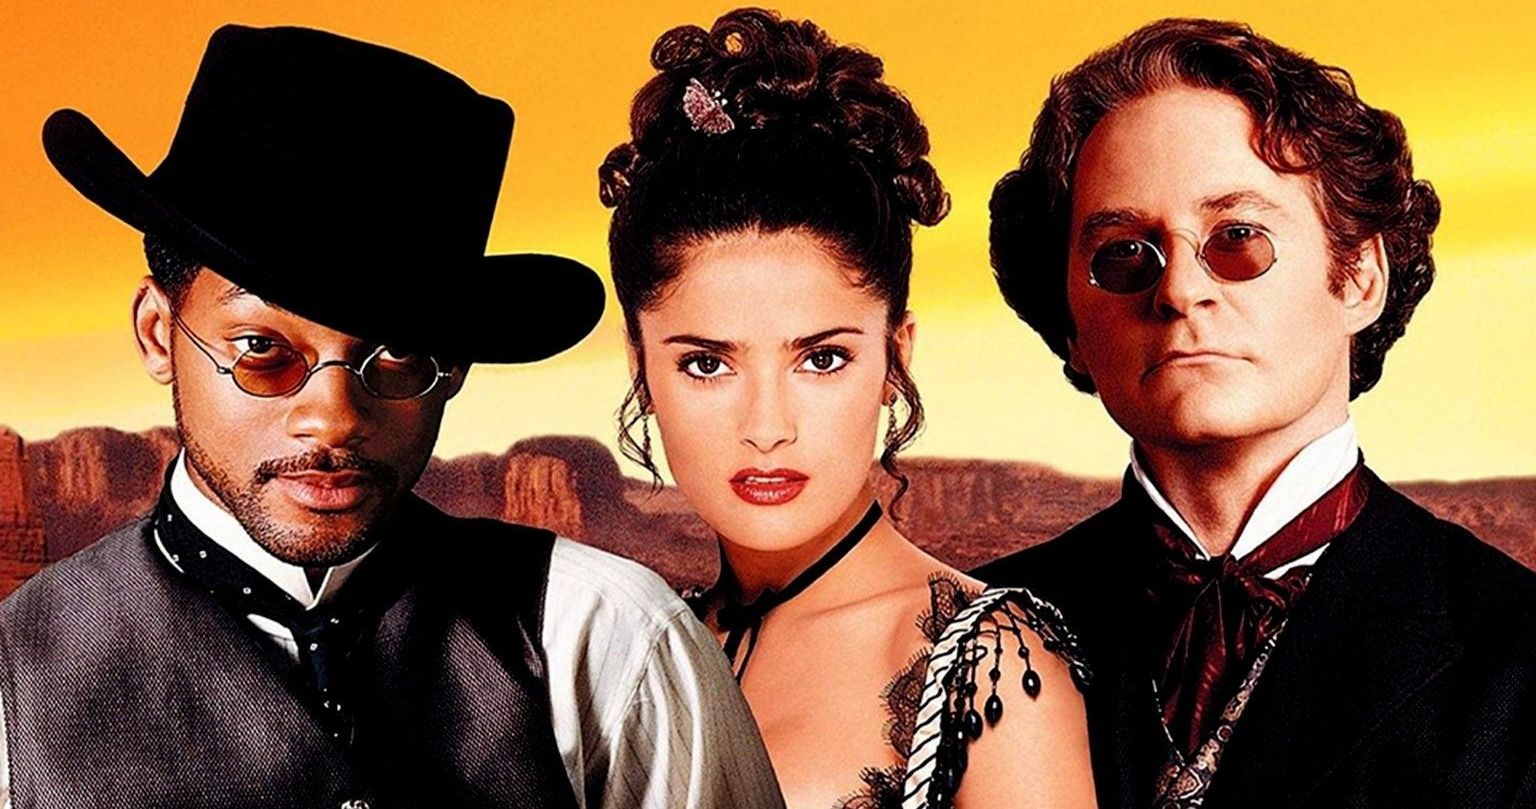 Will Smith Names Wild Wild West as His Worst Movie: It's a Thorn in My Side